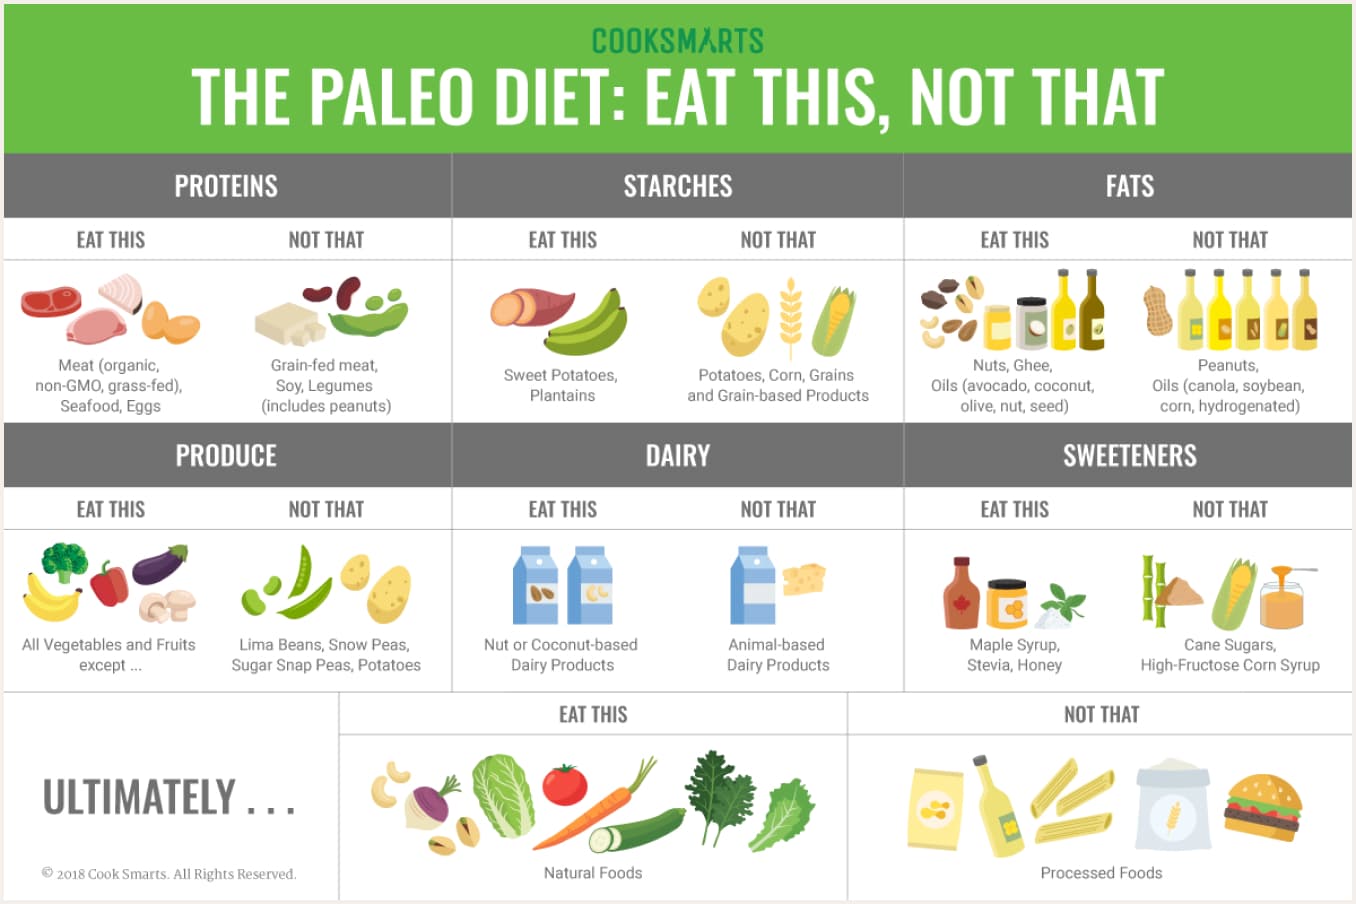 The paleo diet: eat this, not this